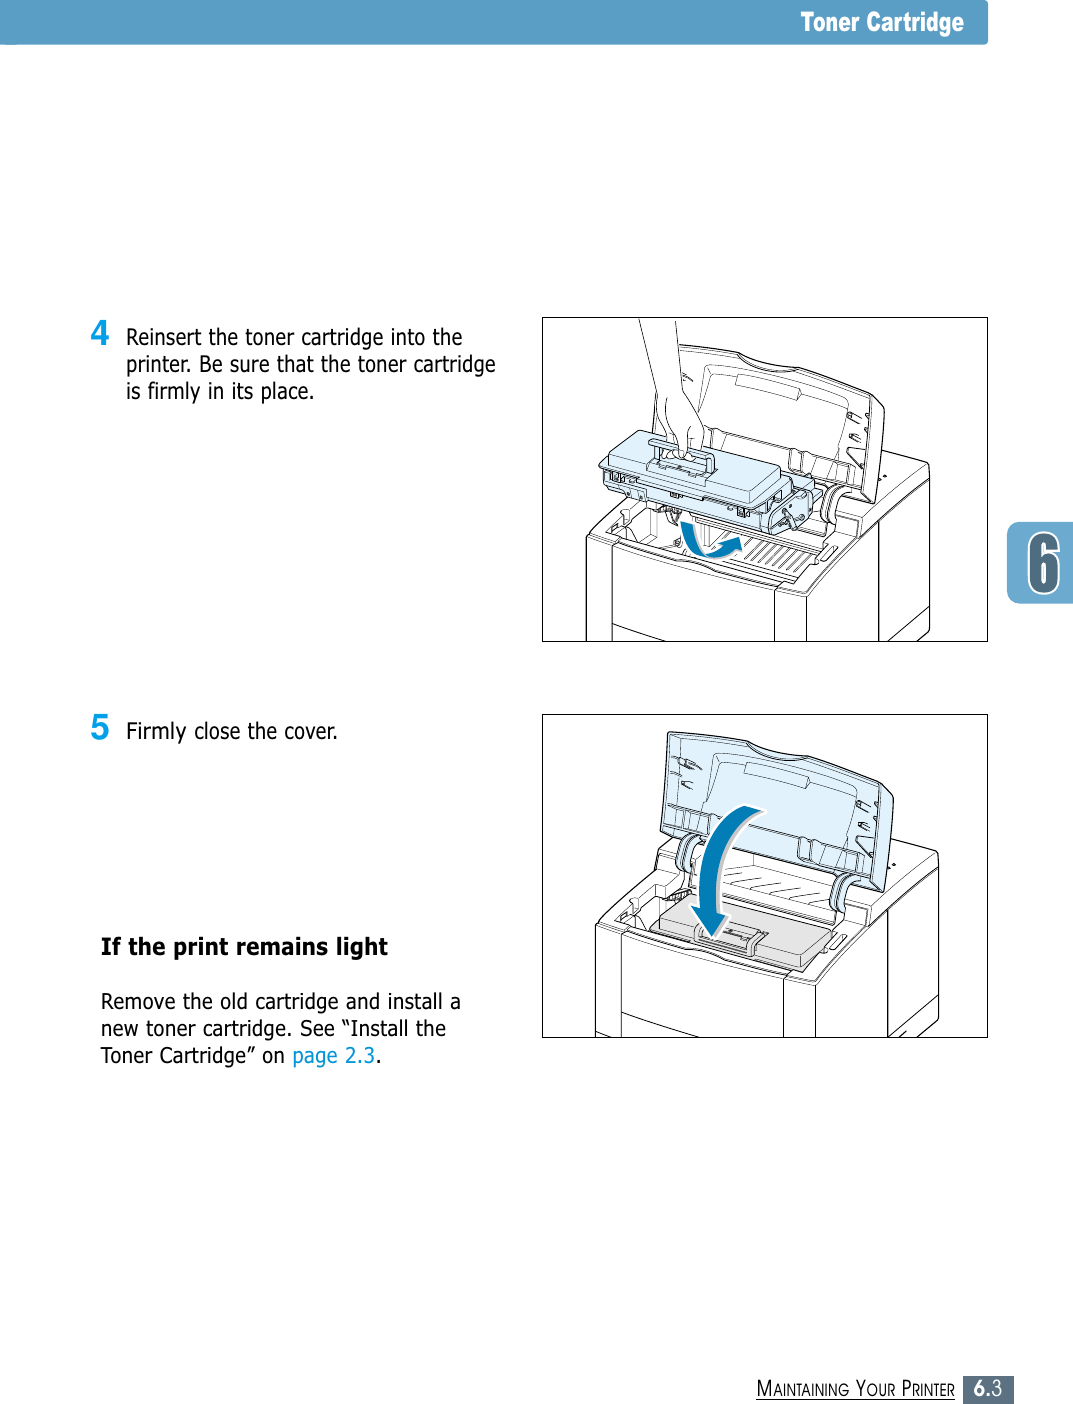 6.3MAINTAINING YOUR PRINTERToner Cartridge4Reinsert the toner cartridge into theprinter. Be sure that the toner cartridgeis firmly in its place.5Firmly close the cover.If the print remains light Remove the old cartridge and install anew toner cartridge. See “Install theToner Cartridge” on page 2.3.